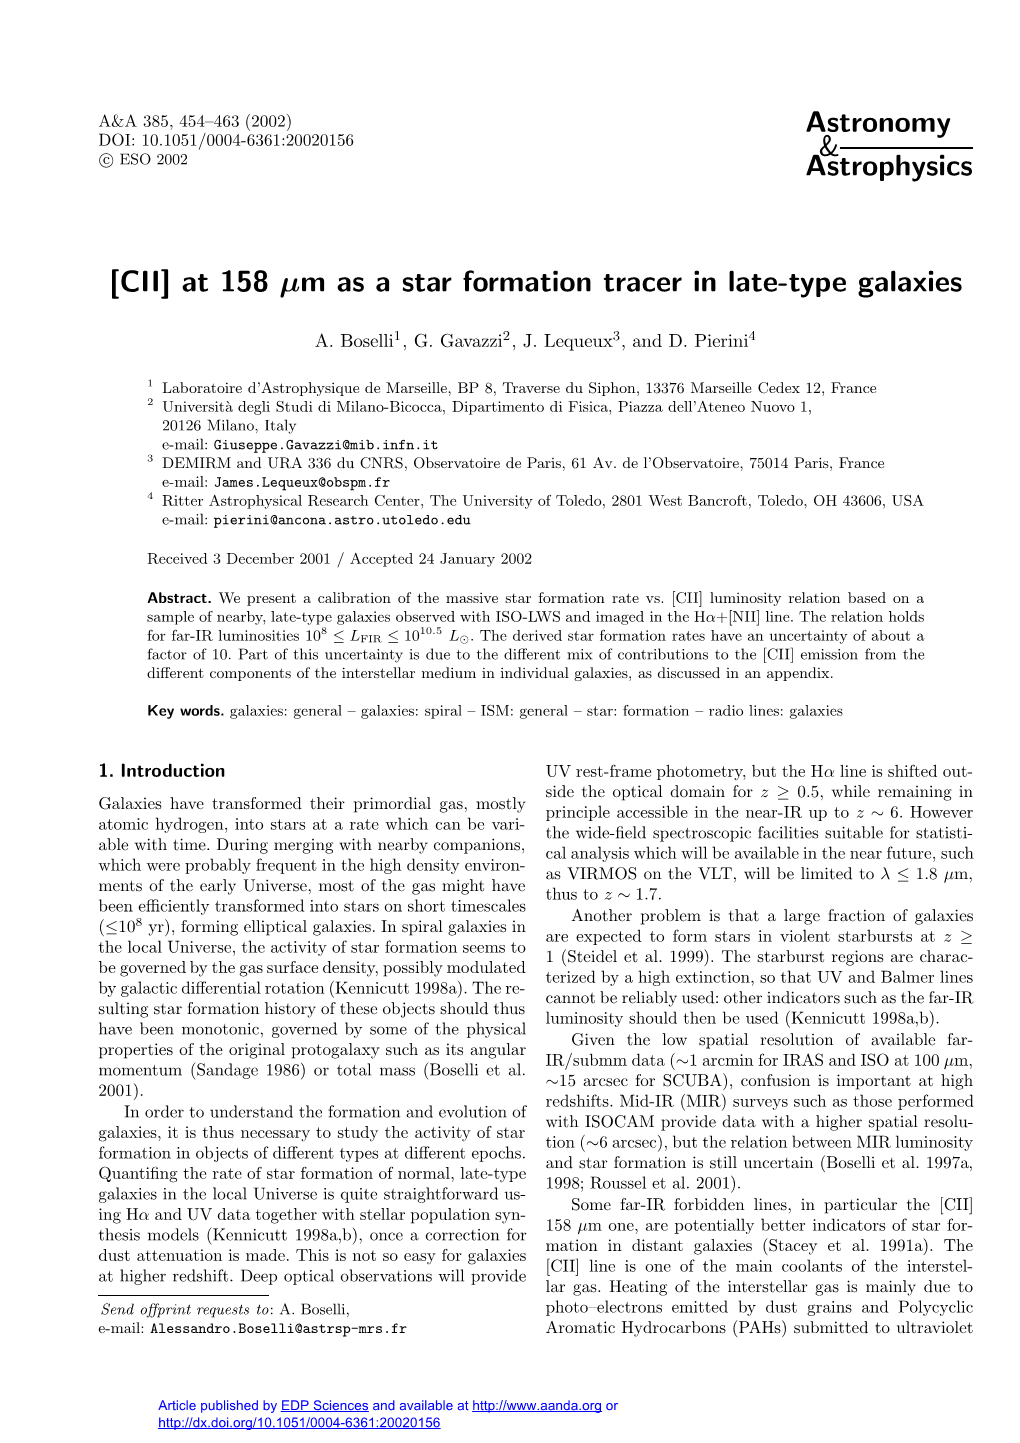 [CII] at 158 Μm As a Star Formation Tracer in Late-Type Galaxies